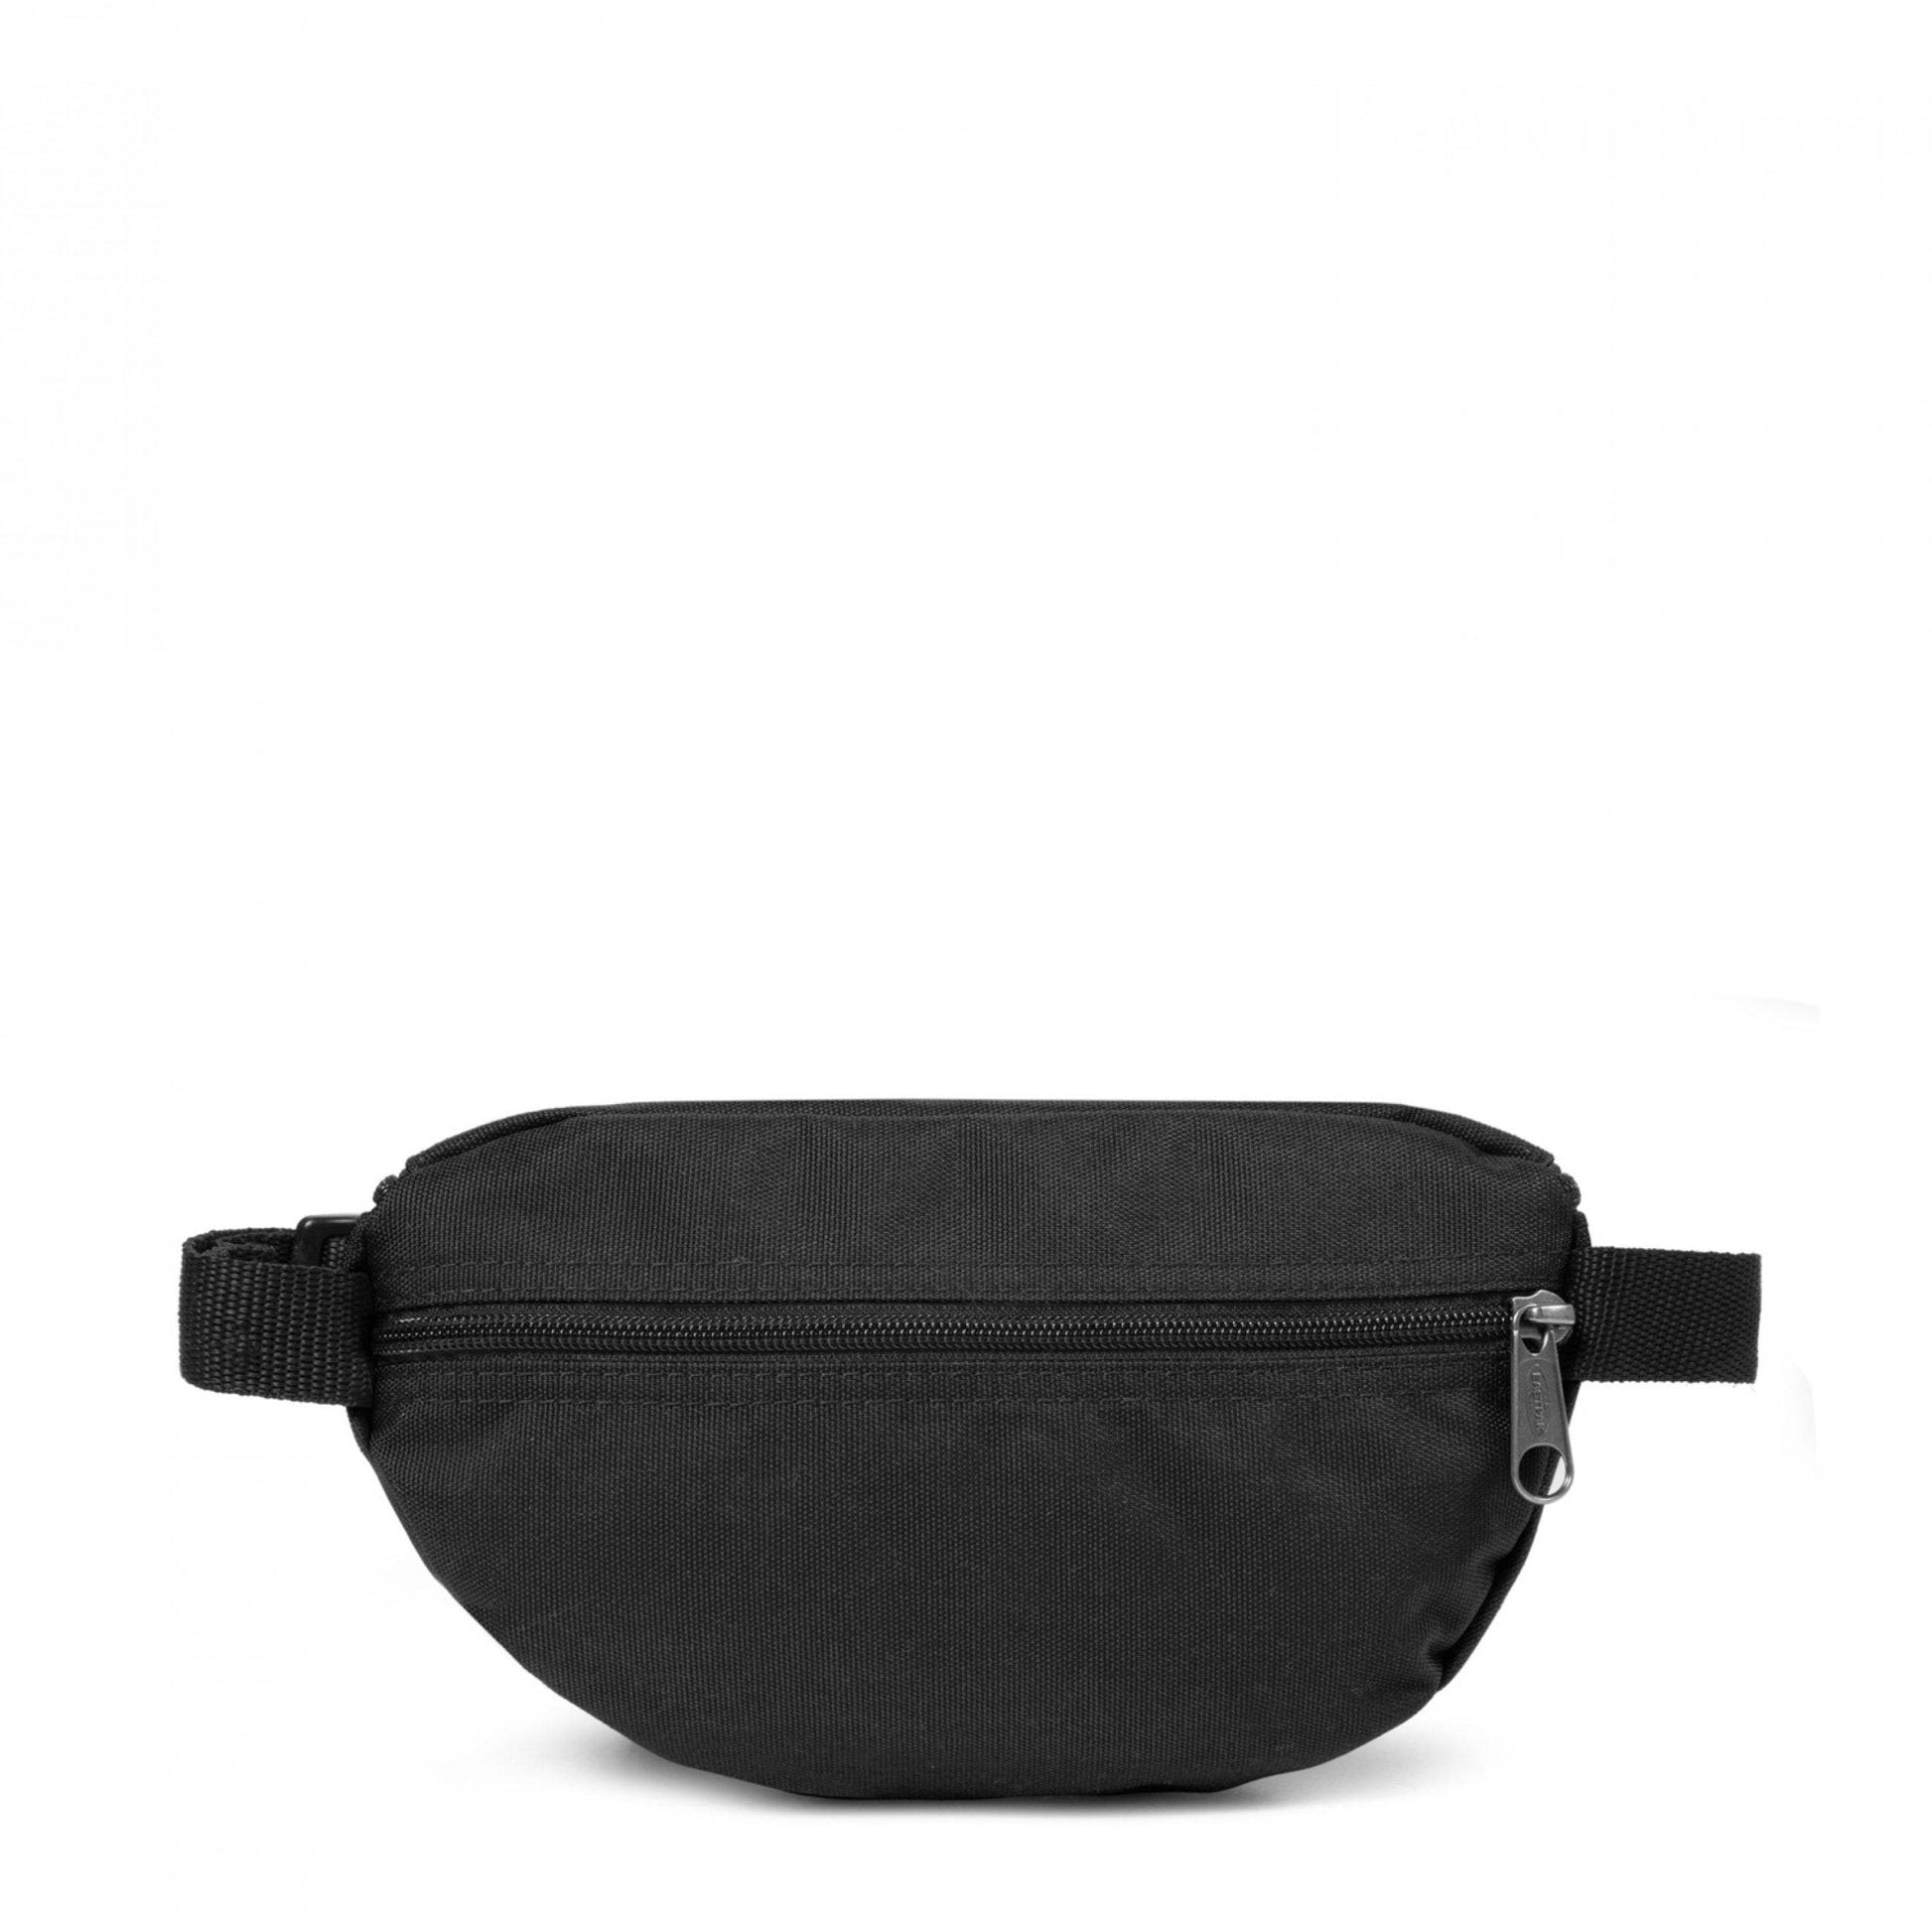 Waist Packs by Eastpak - The Luxury Promotional Gifts Company Limited